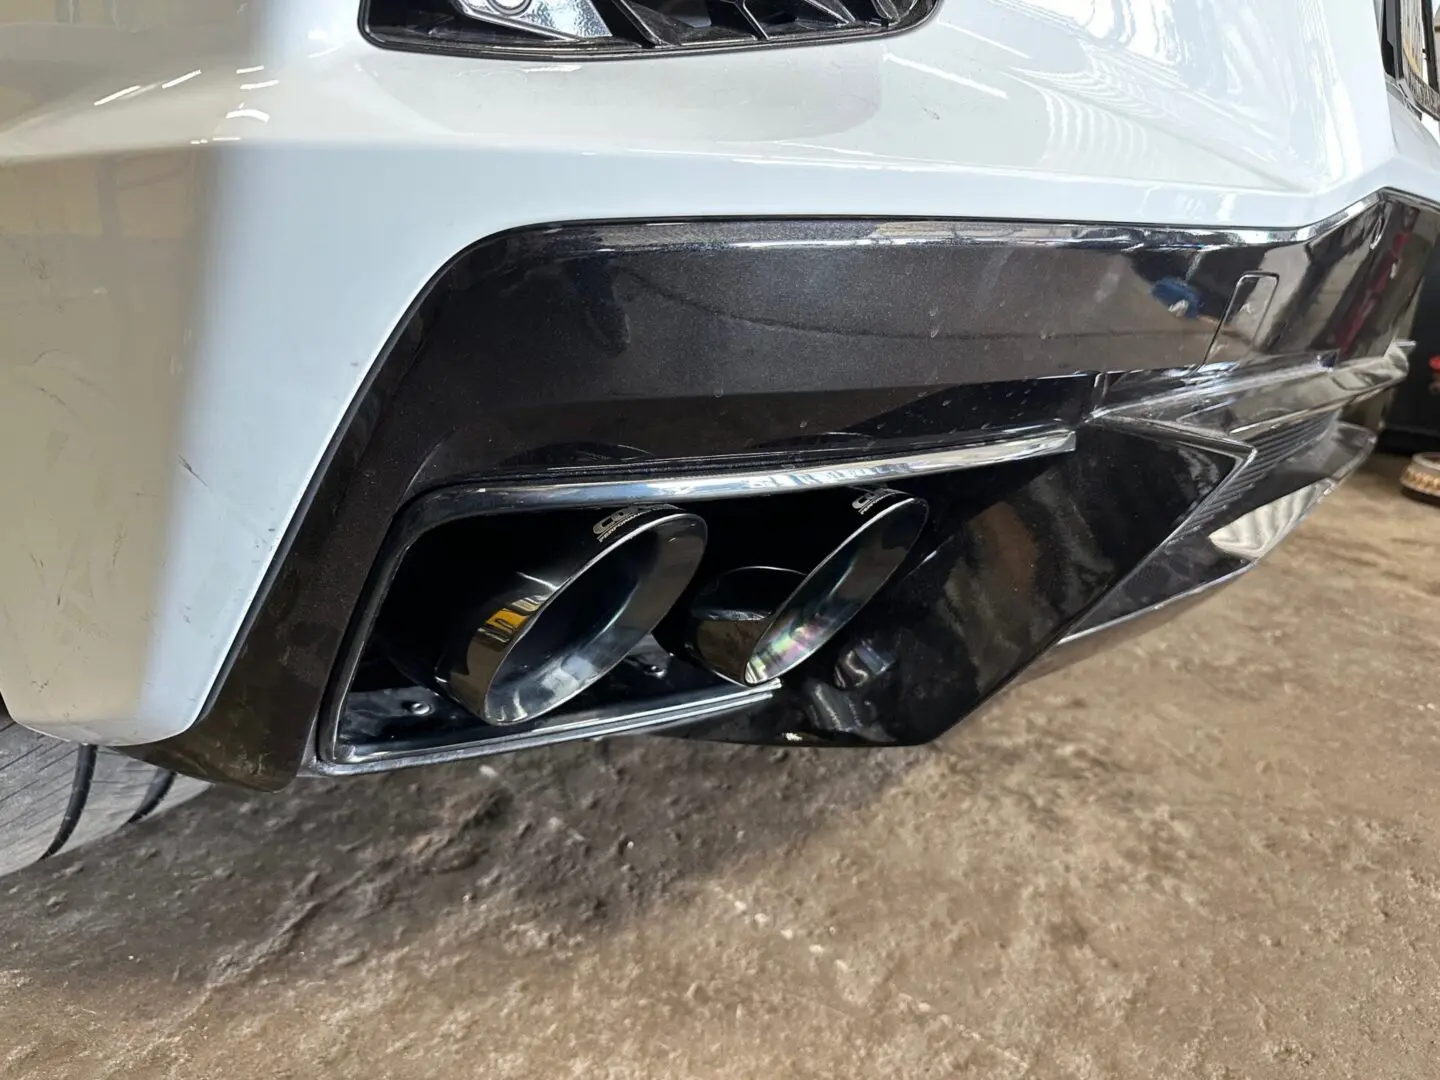 A close up of the exhaust pipes on a car